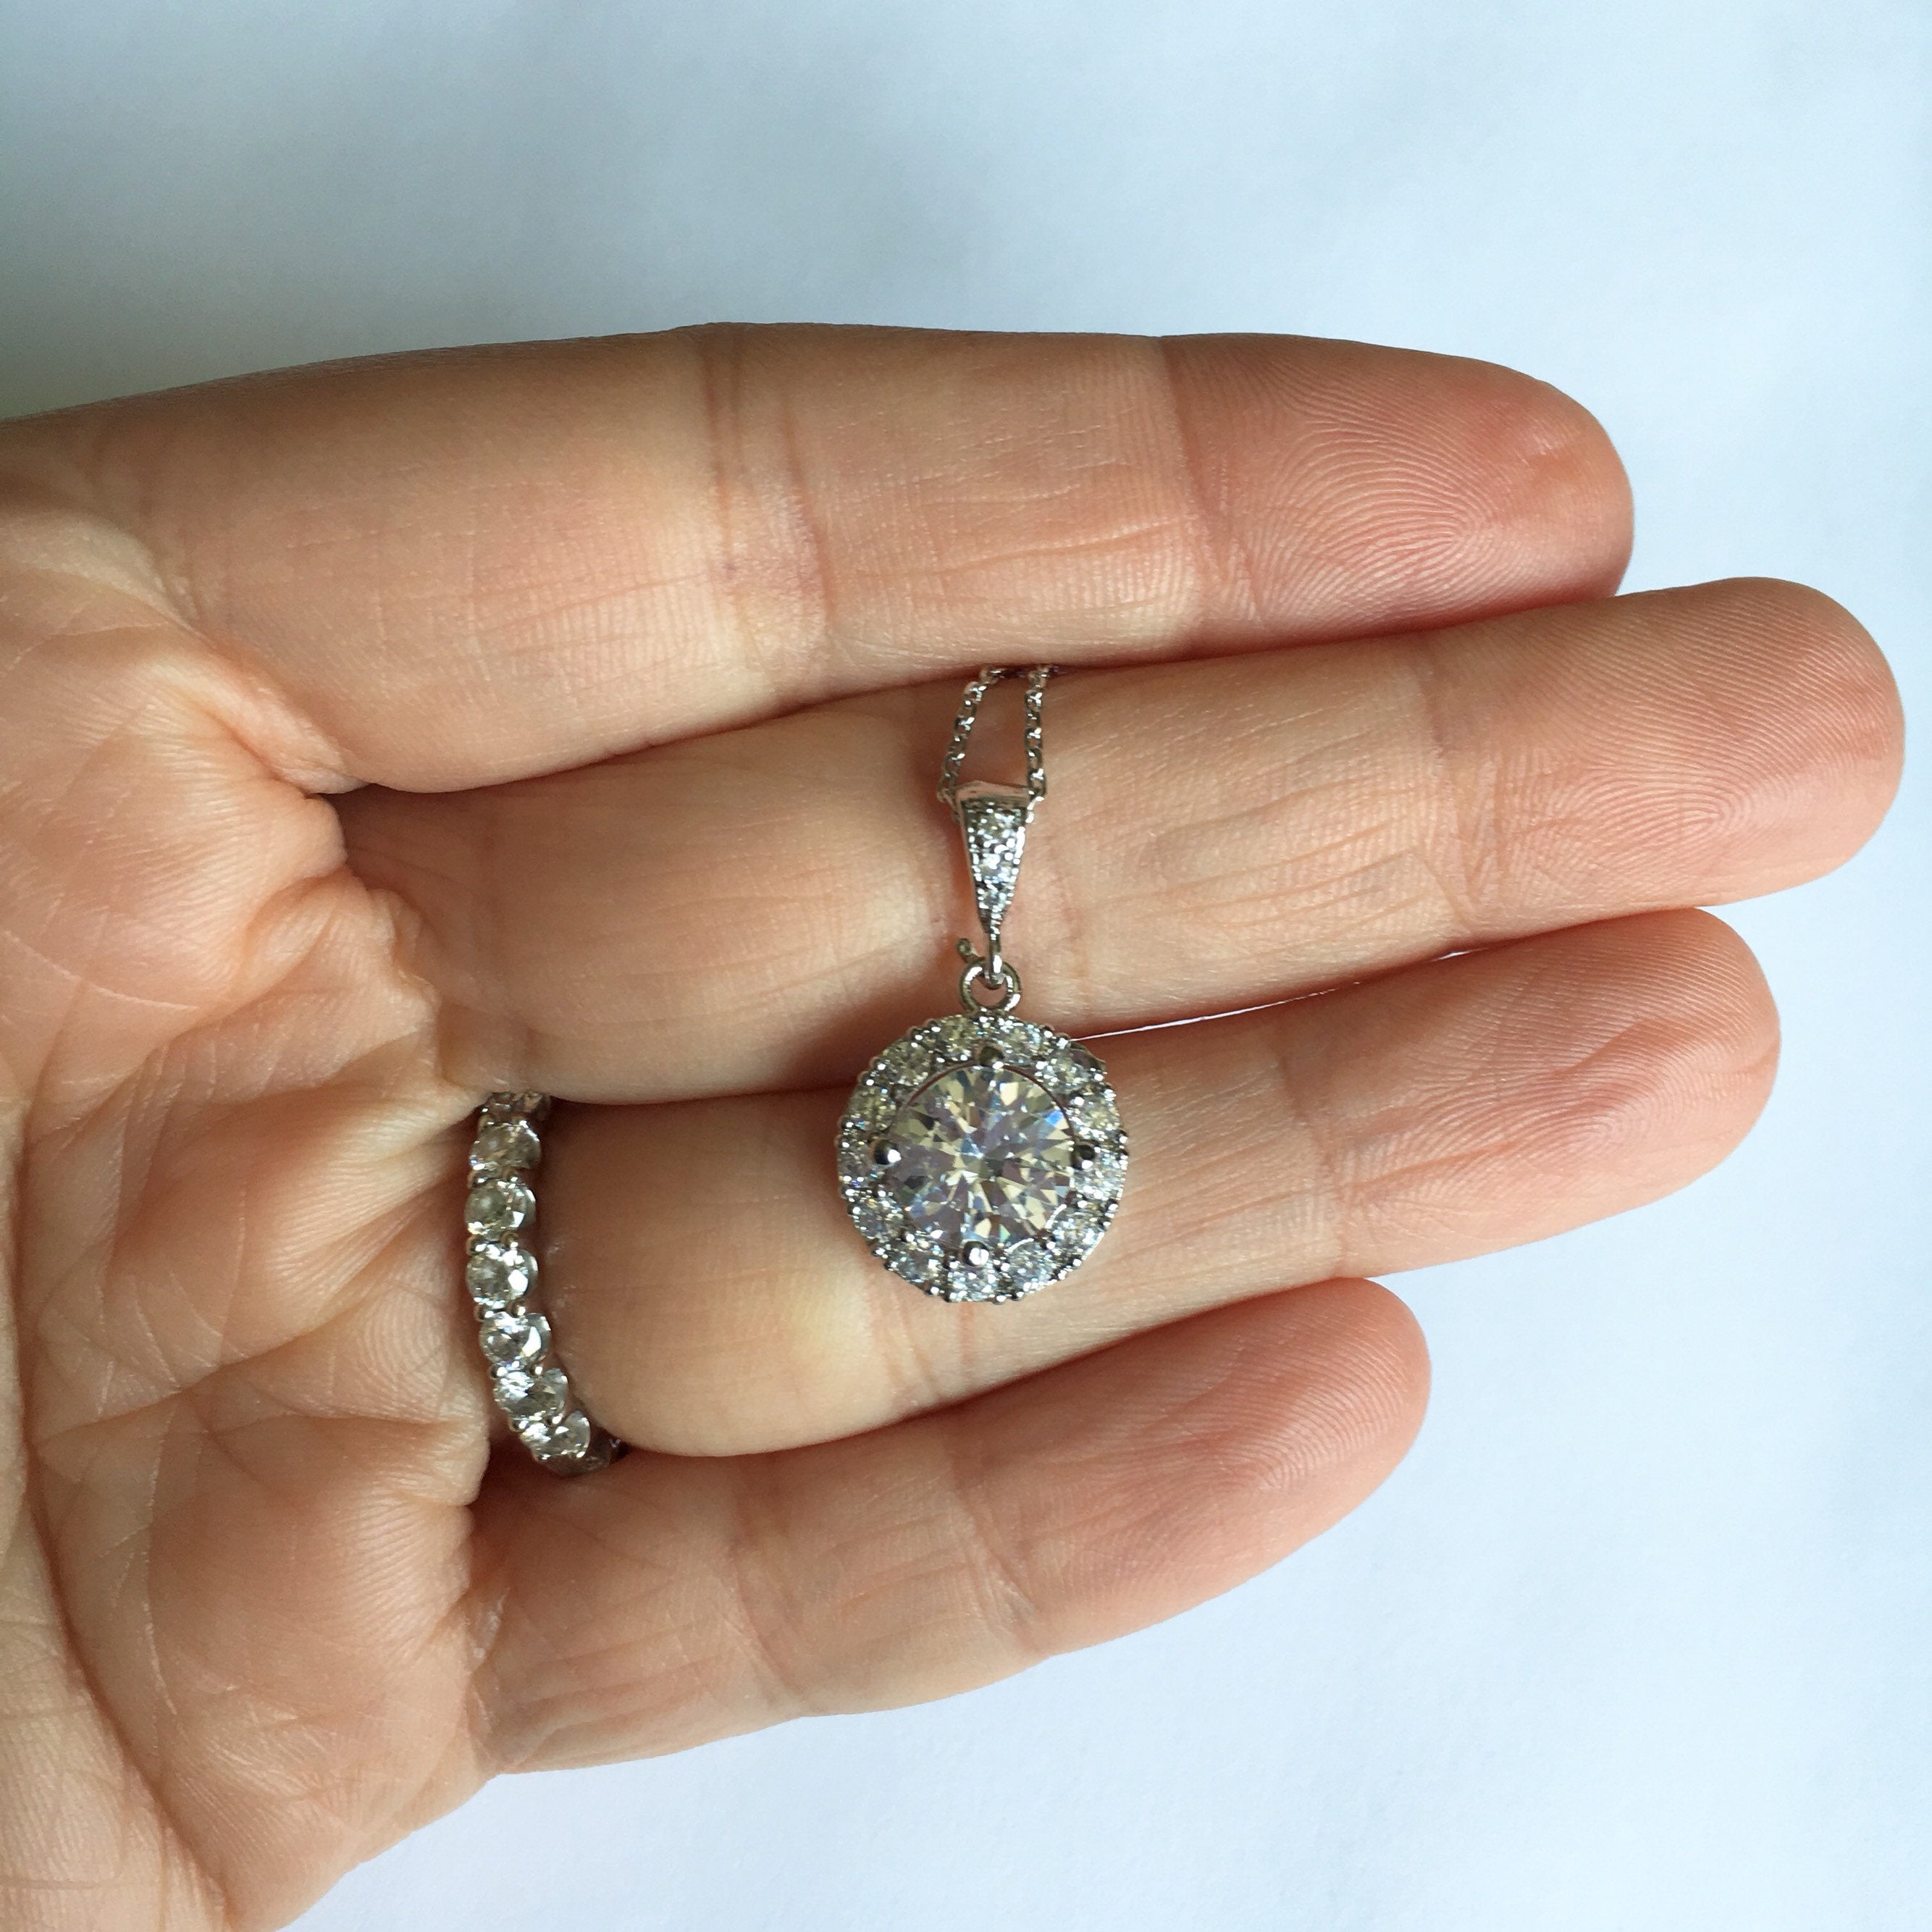 Hand holding Round cubic zirconia crystal necklace set in silver color rhodium plated brass pendant.